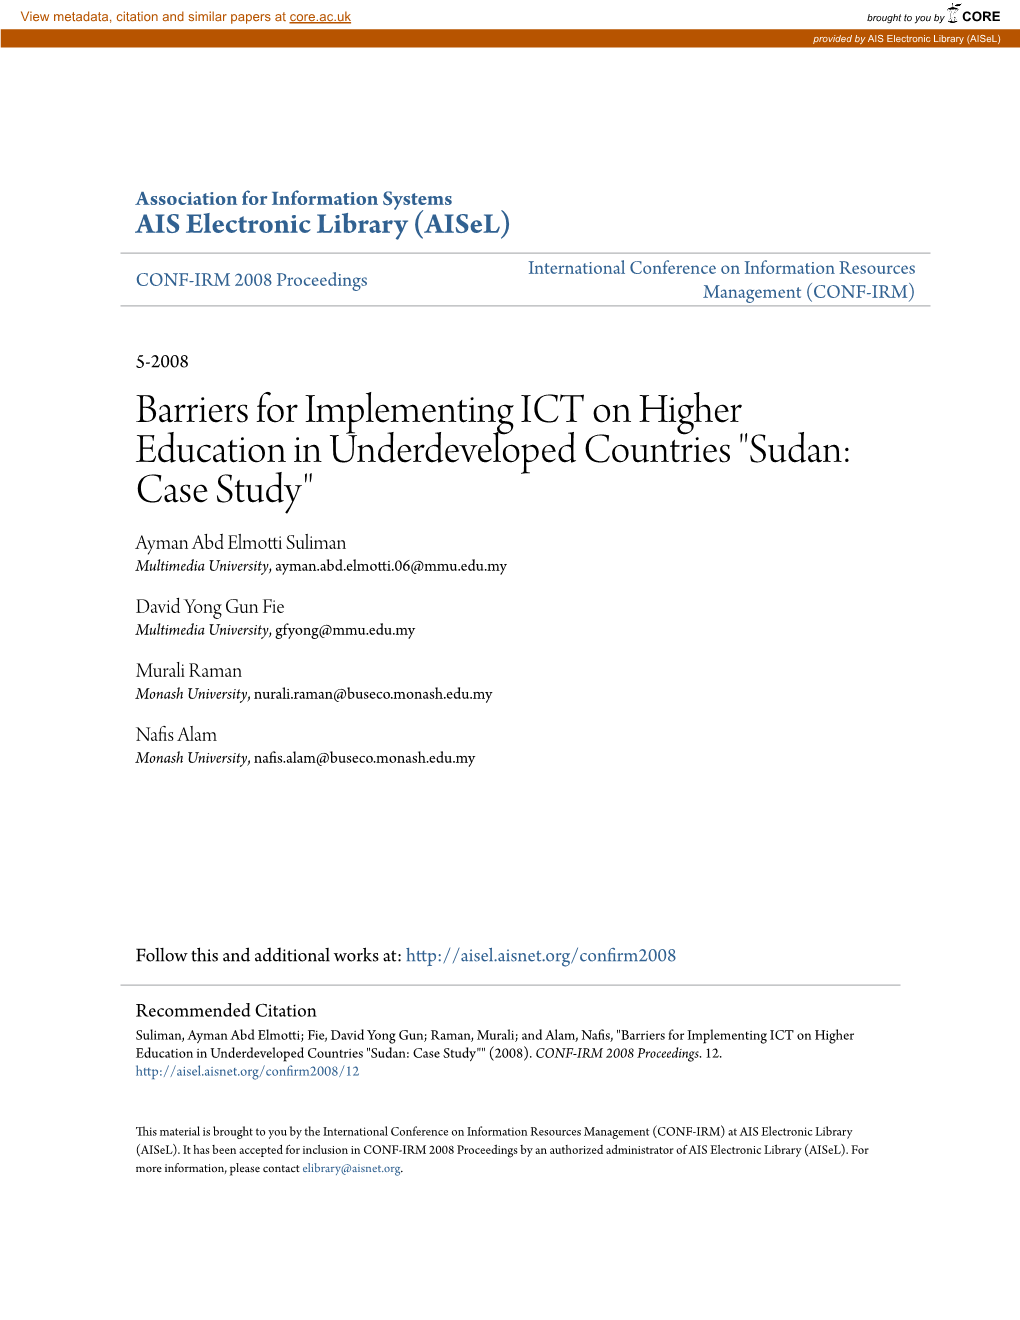 Barriers for Implementing ICT on Higher Education In